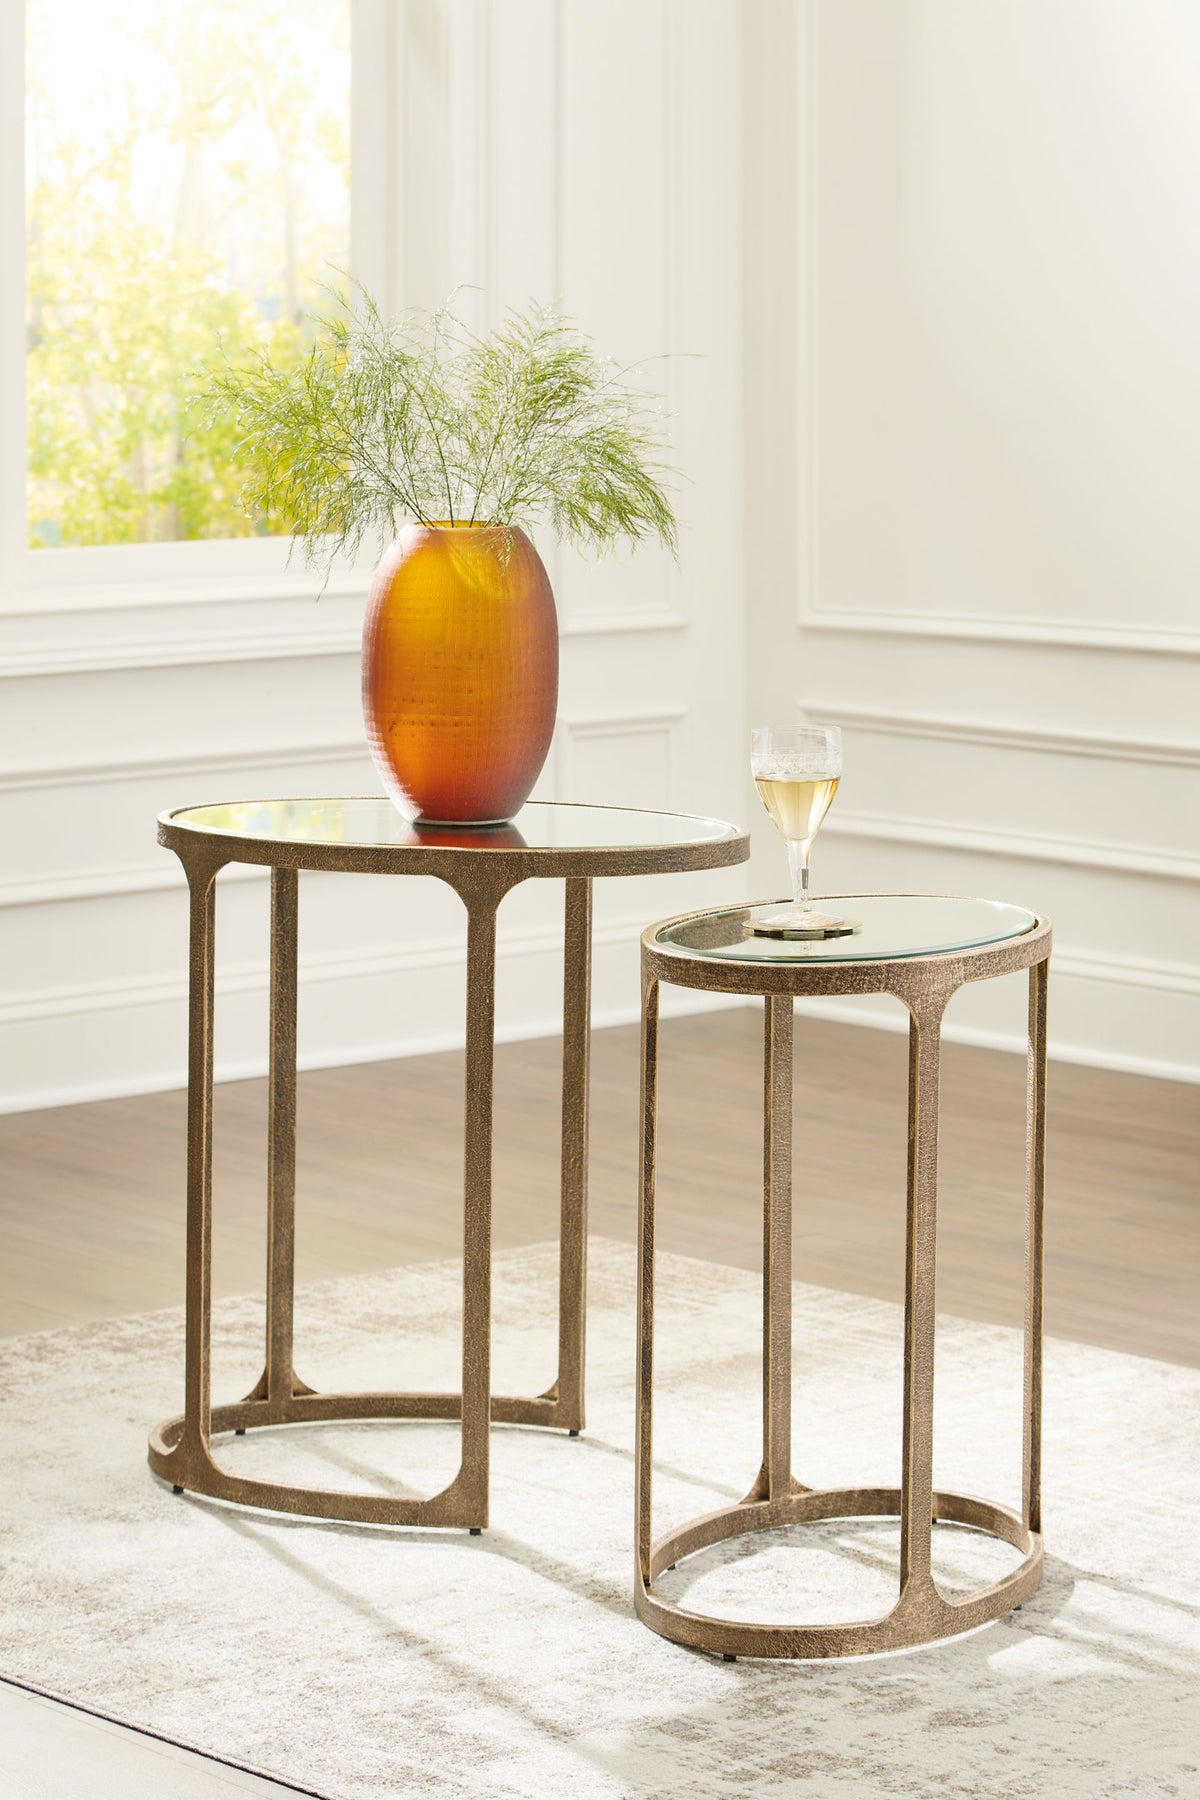 Irmaleigh Accent Table (Set of 2) - Half Price Furniture